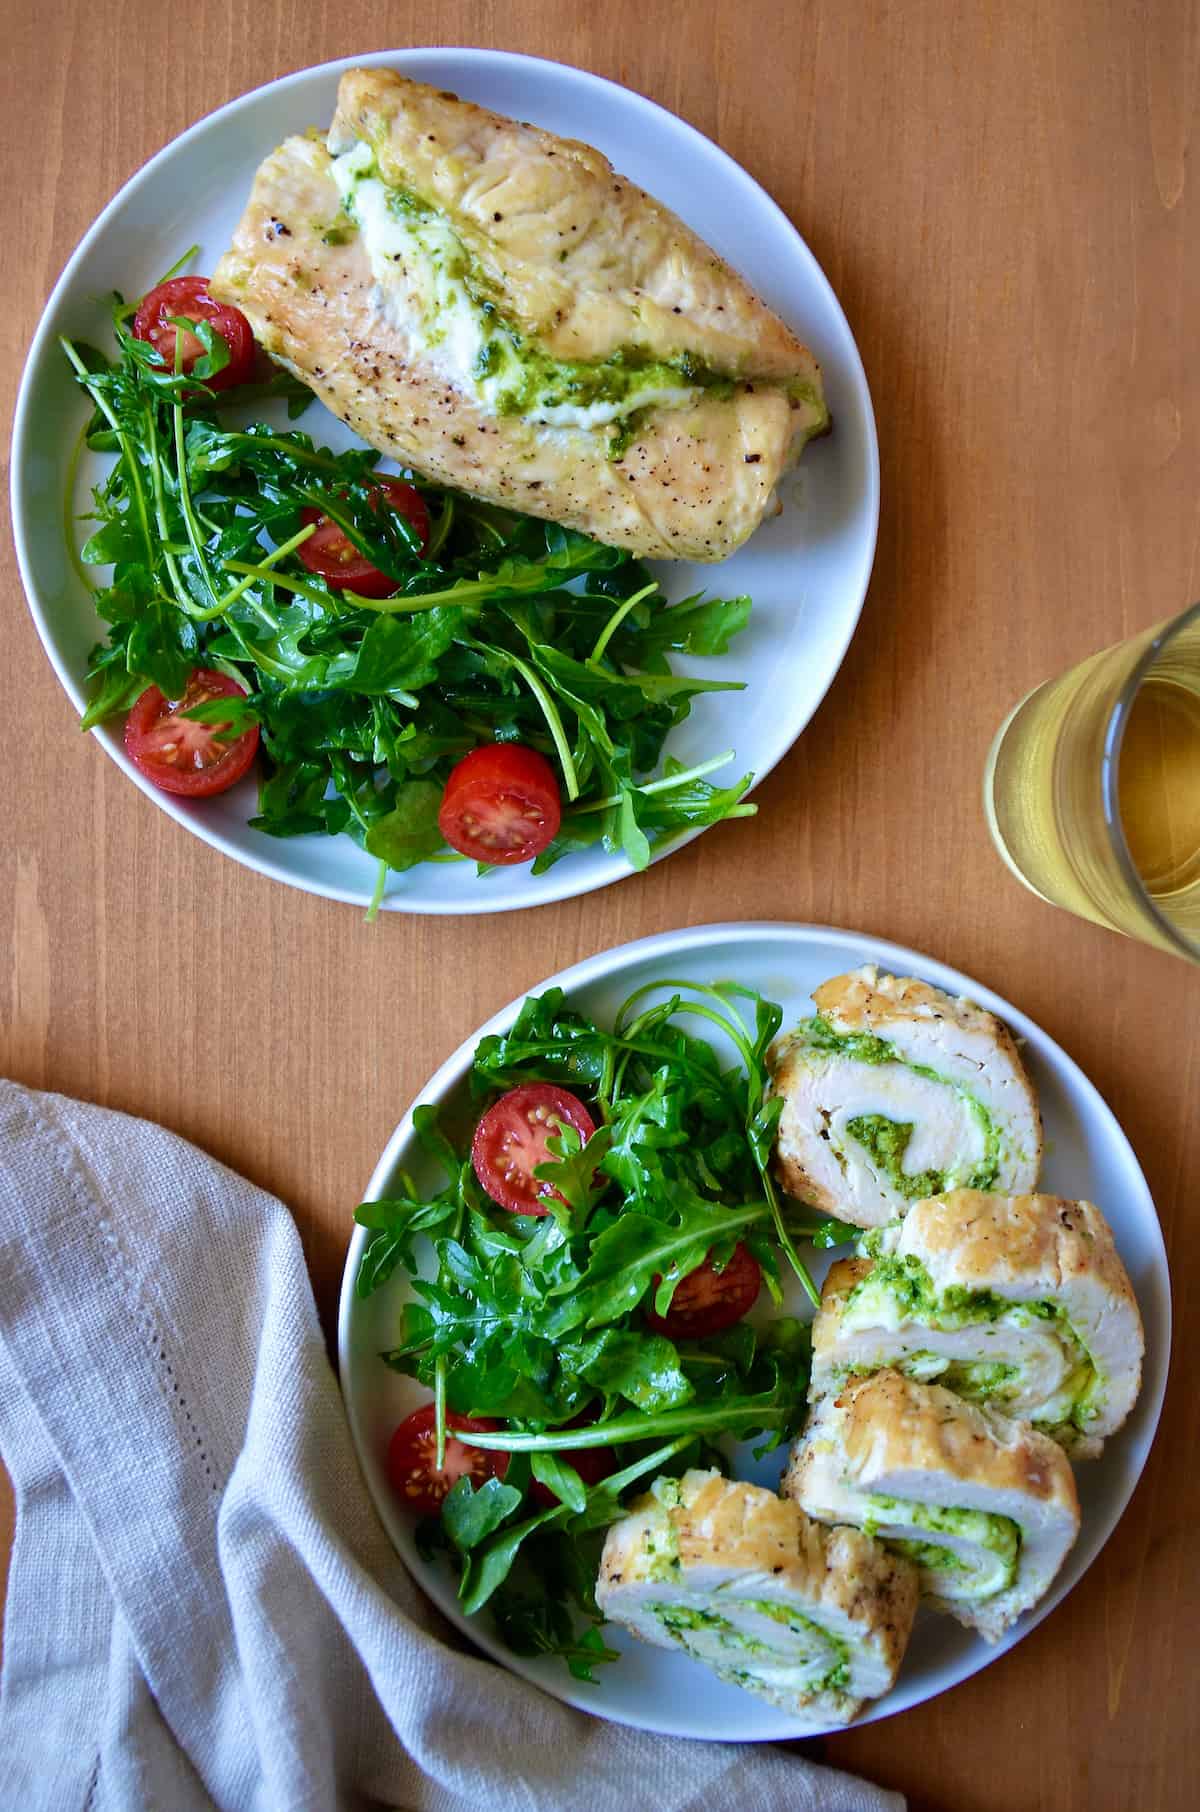 Sliced chicken roulades filled with pesto are on a plate with a salad of greens and tomatoes.